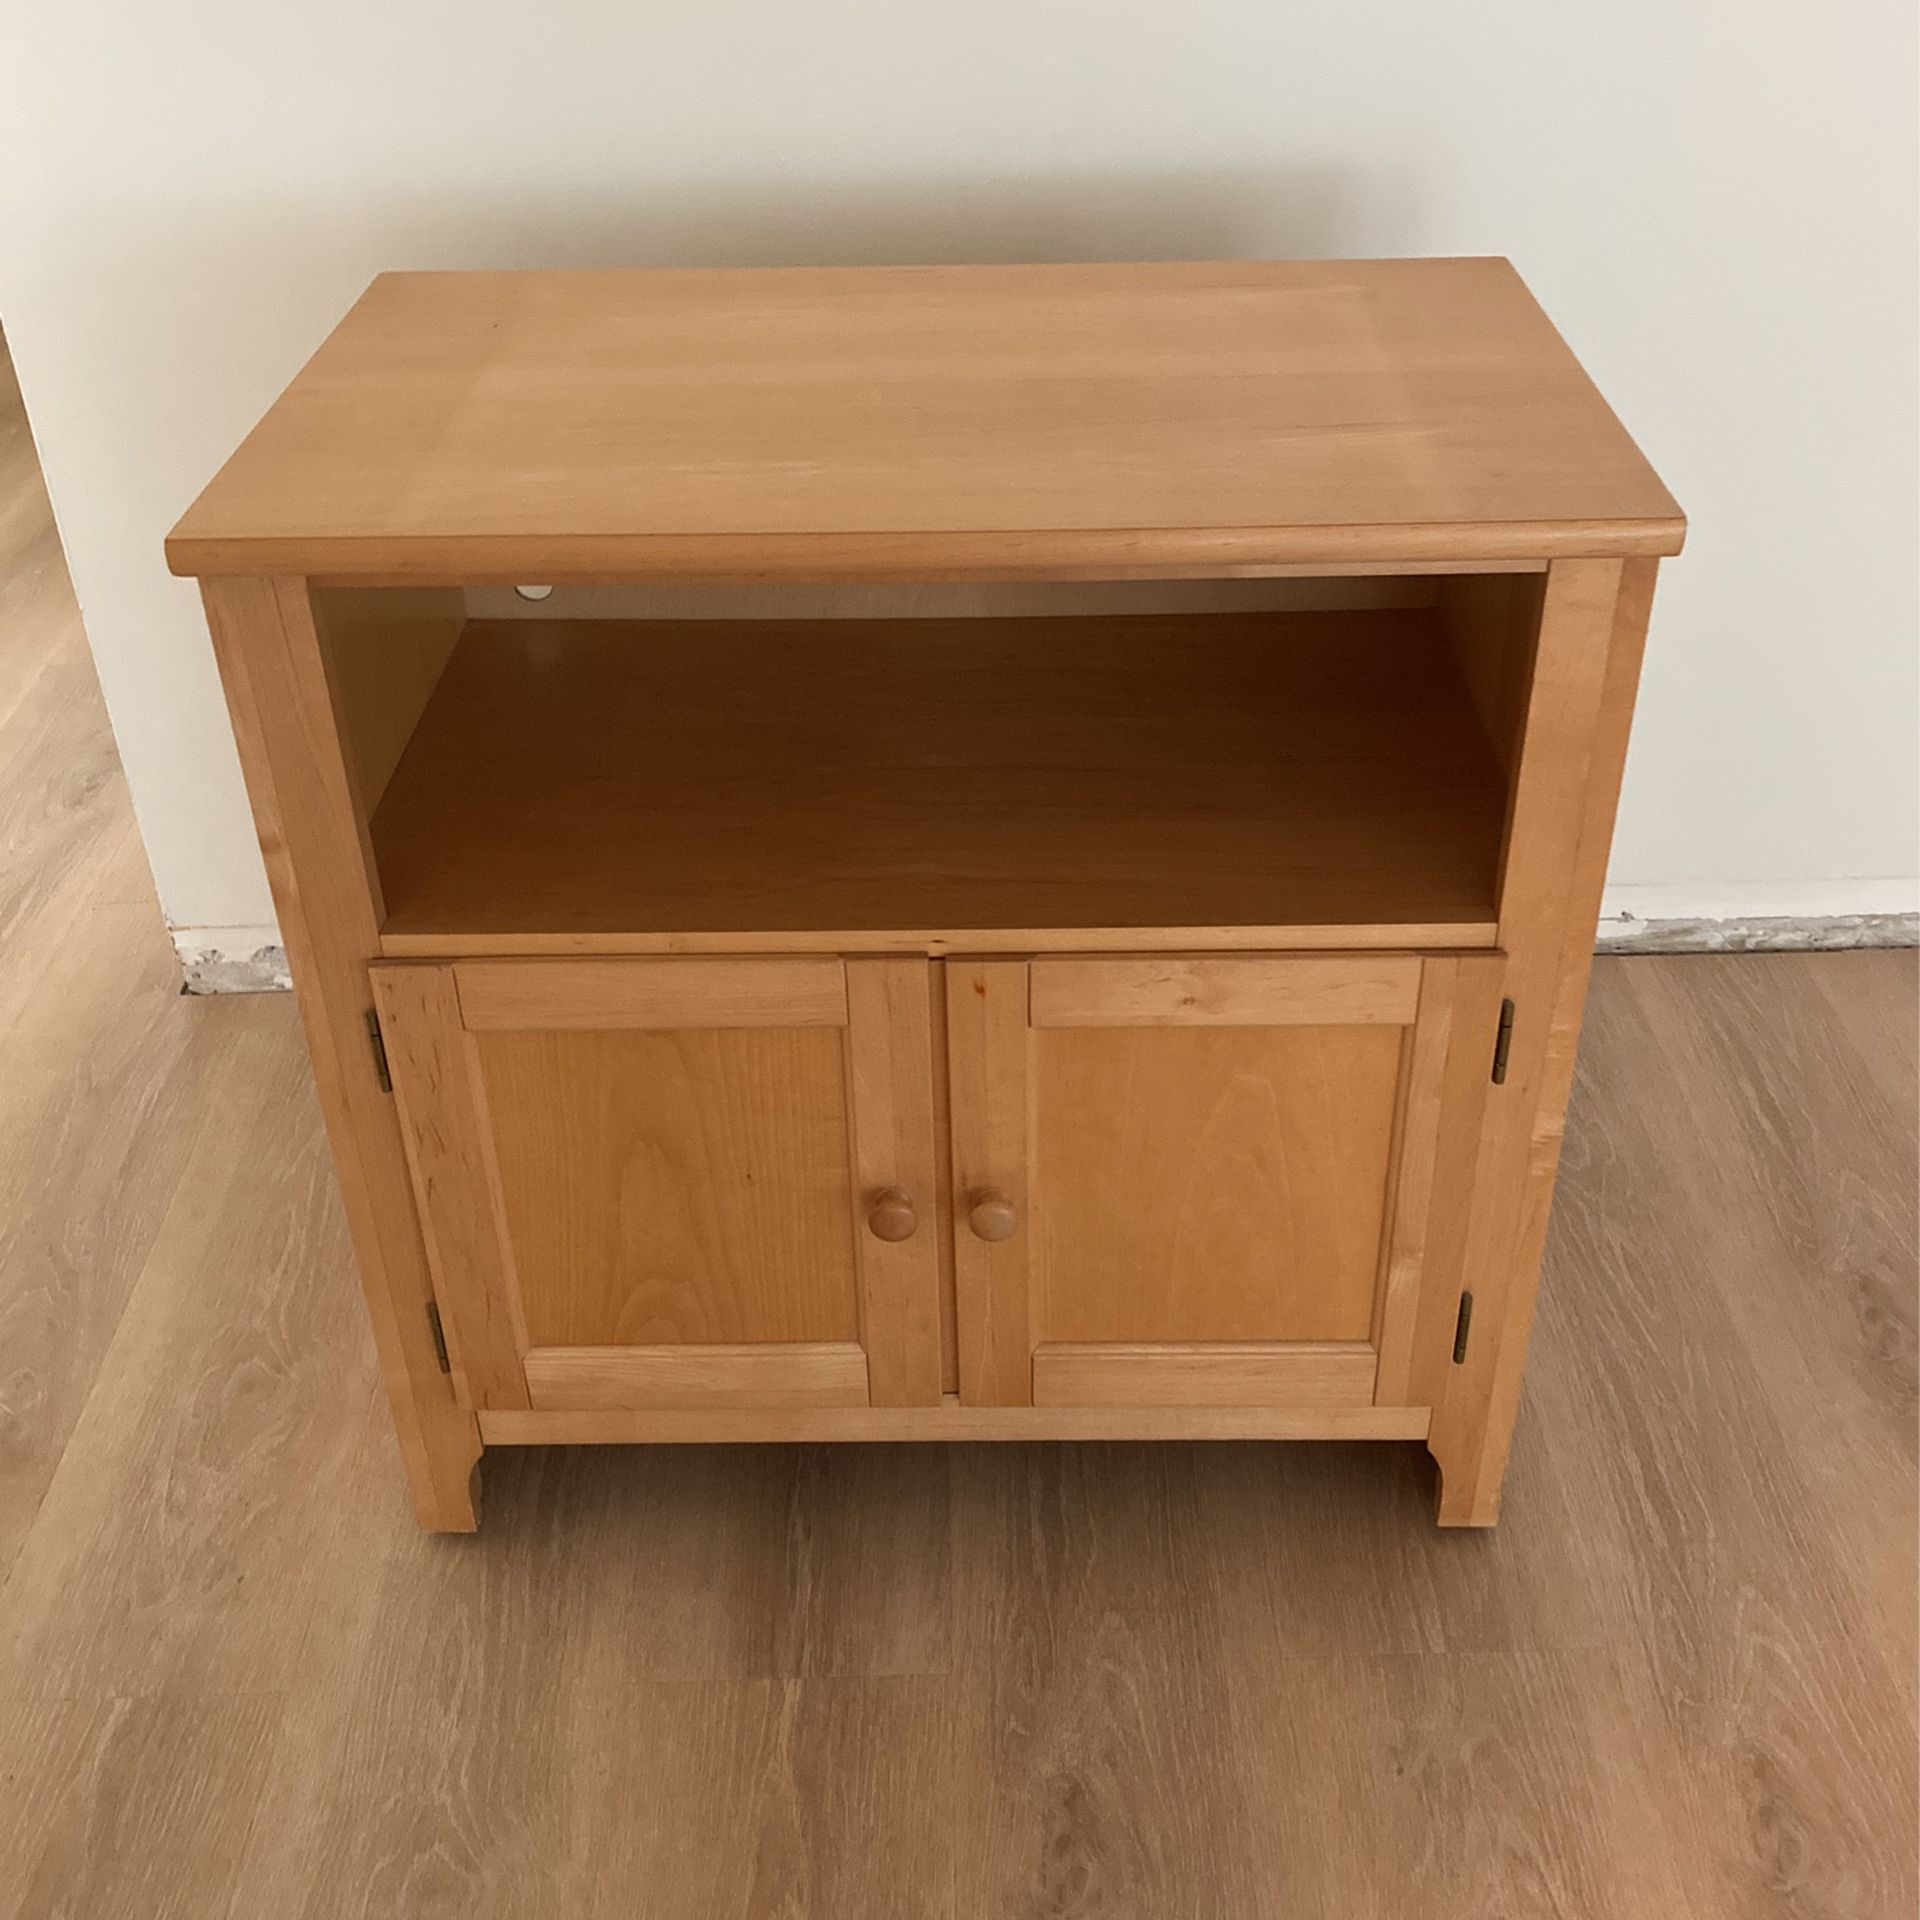 Stanley TV stand